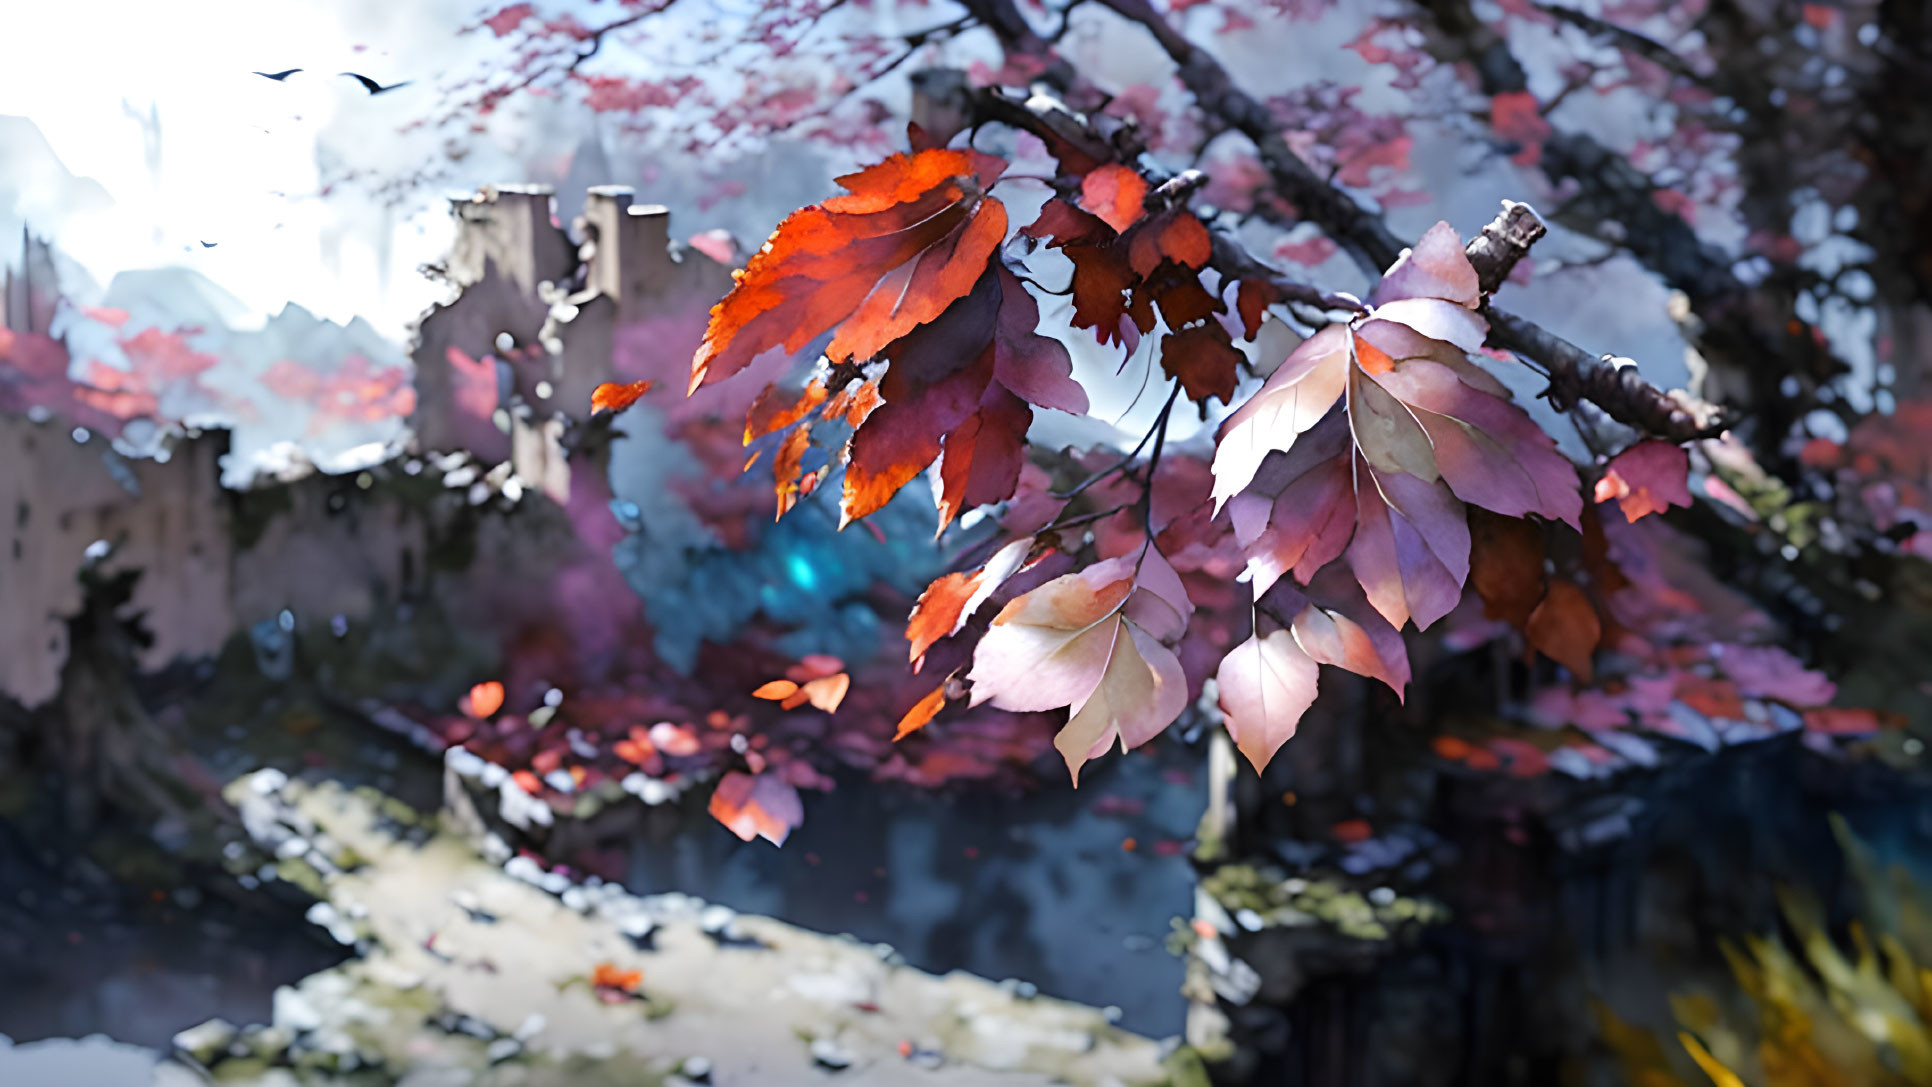 Autumn leaves foreground, abandoned cityscape background with overgrown nature.